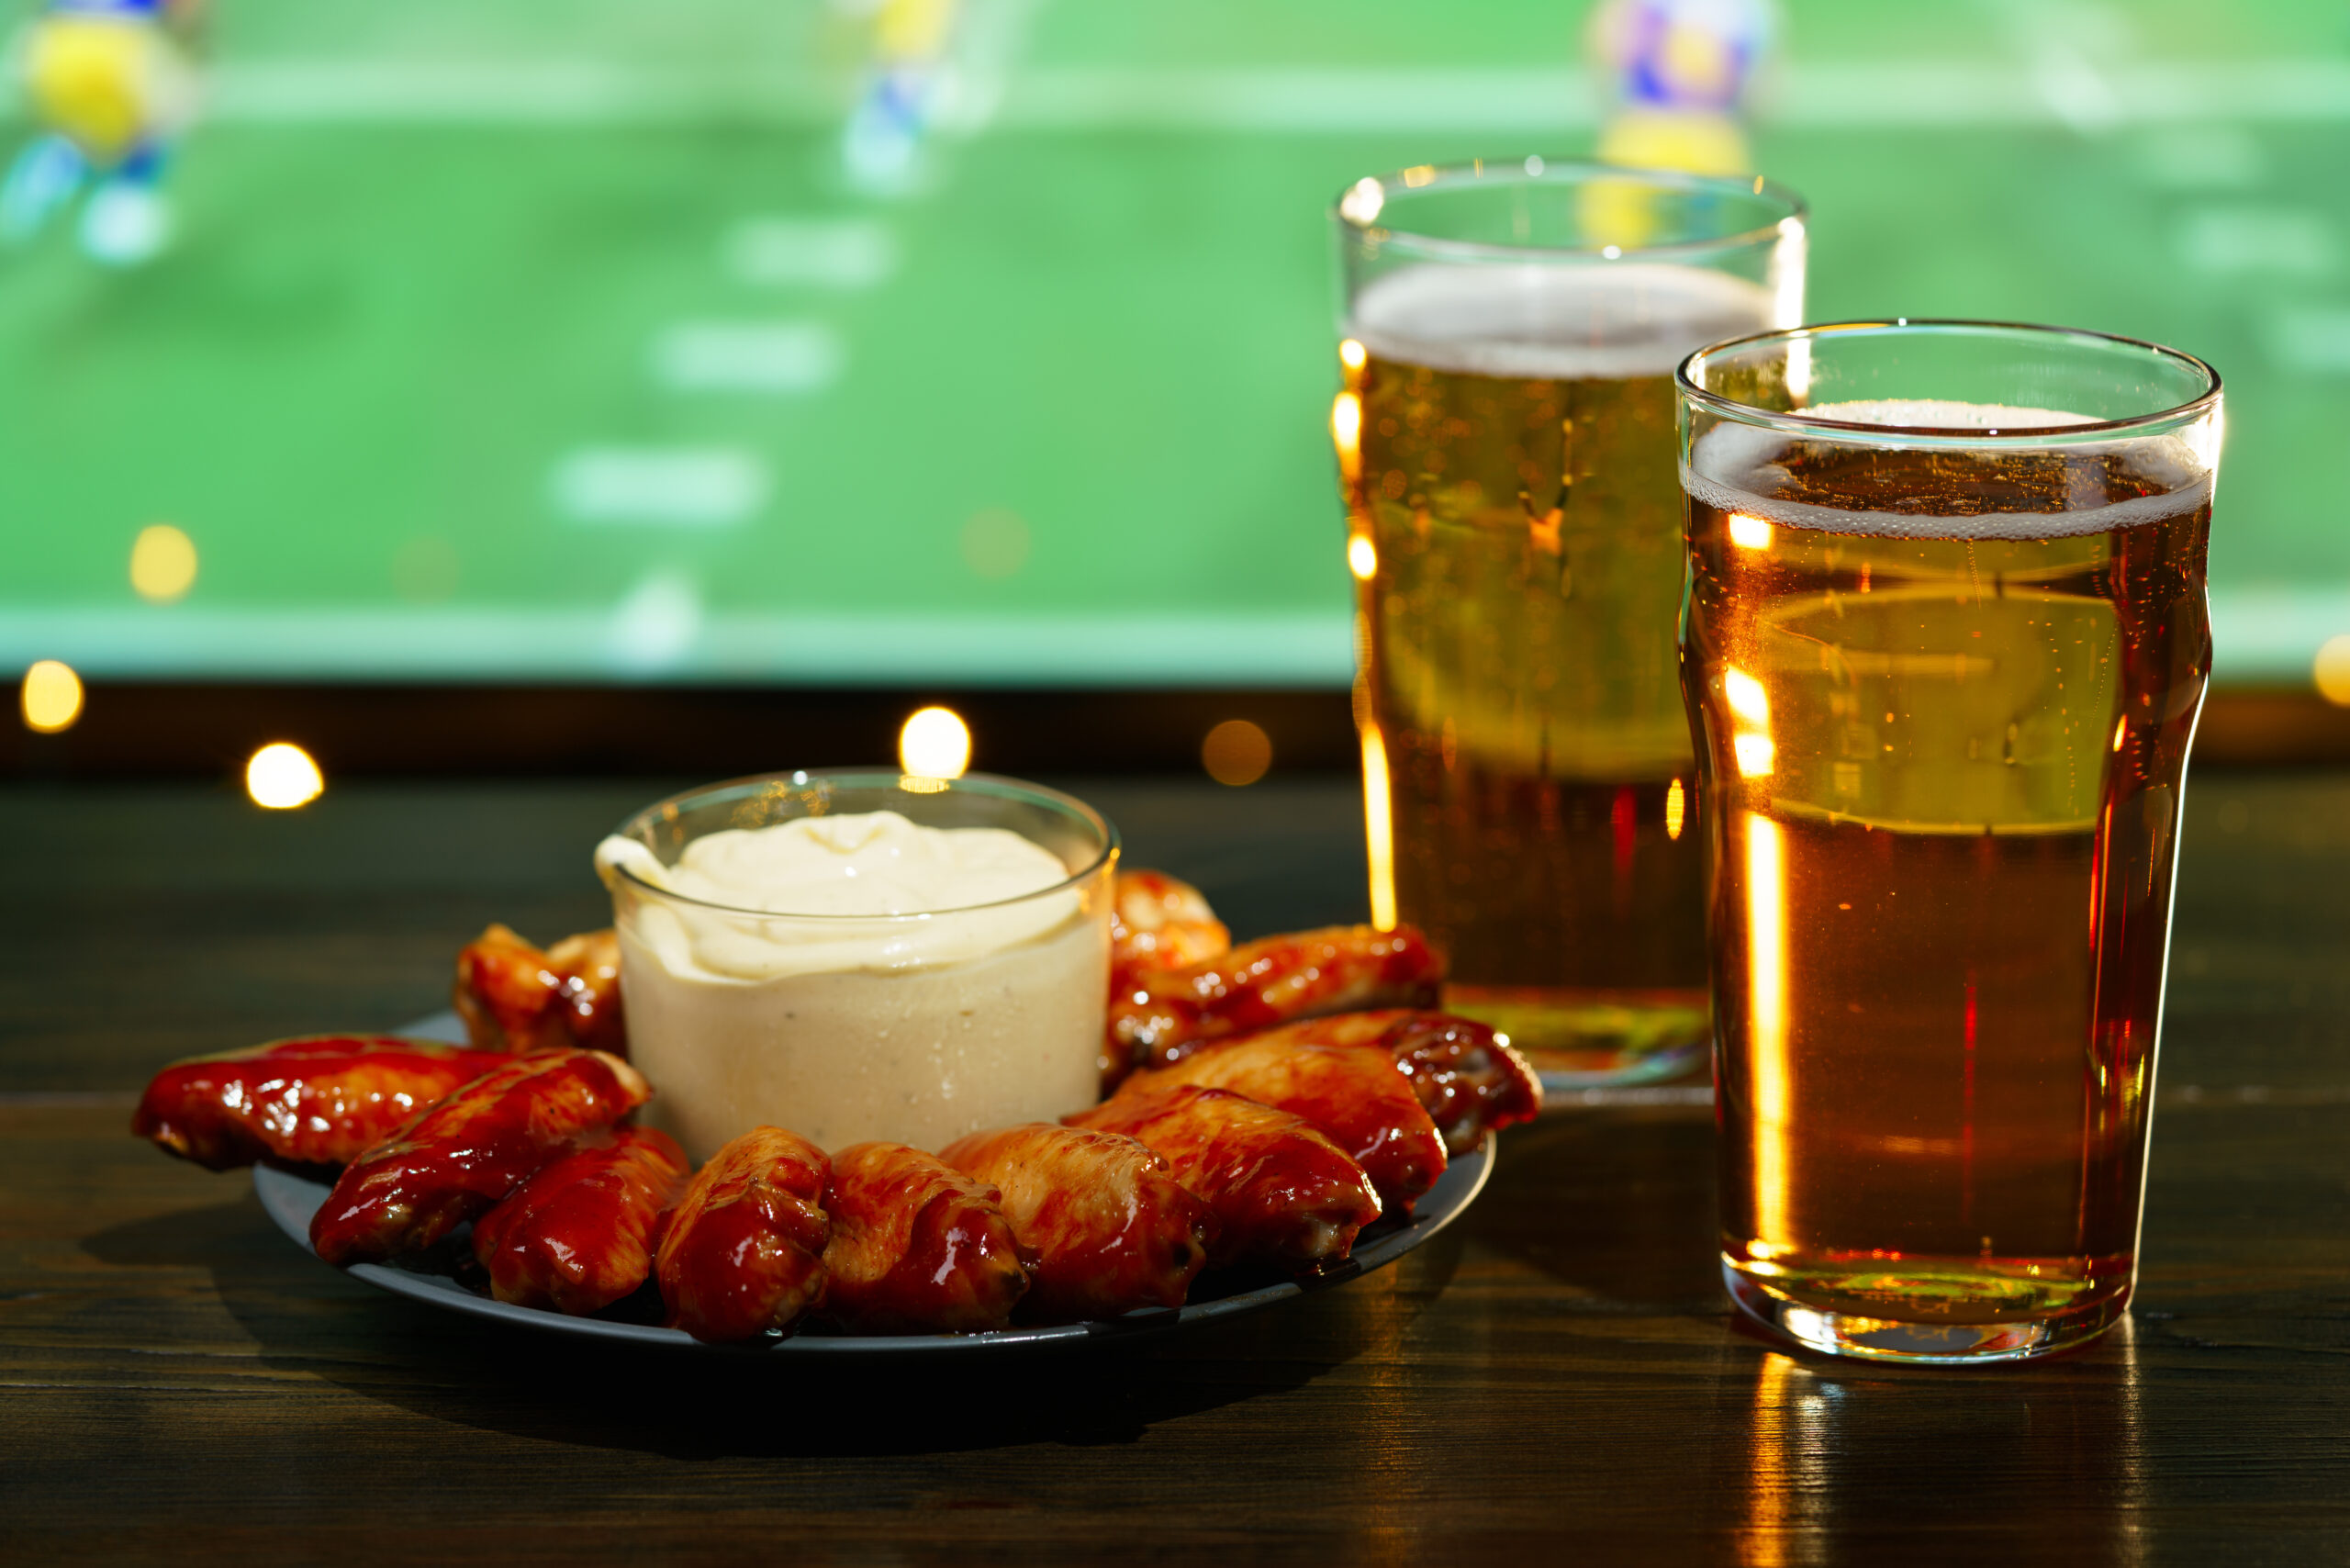 beer and chicken wings in front of a game of football on the TV.